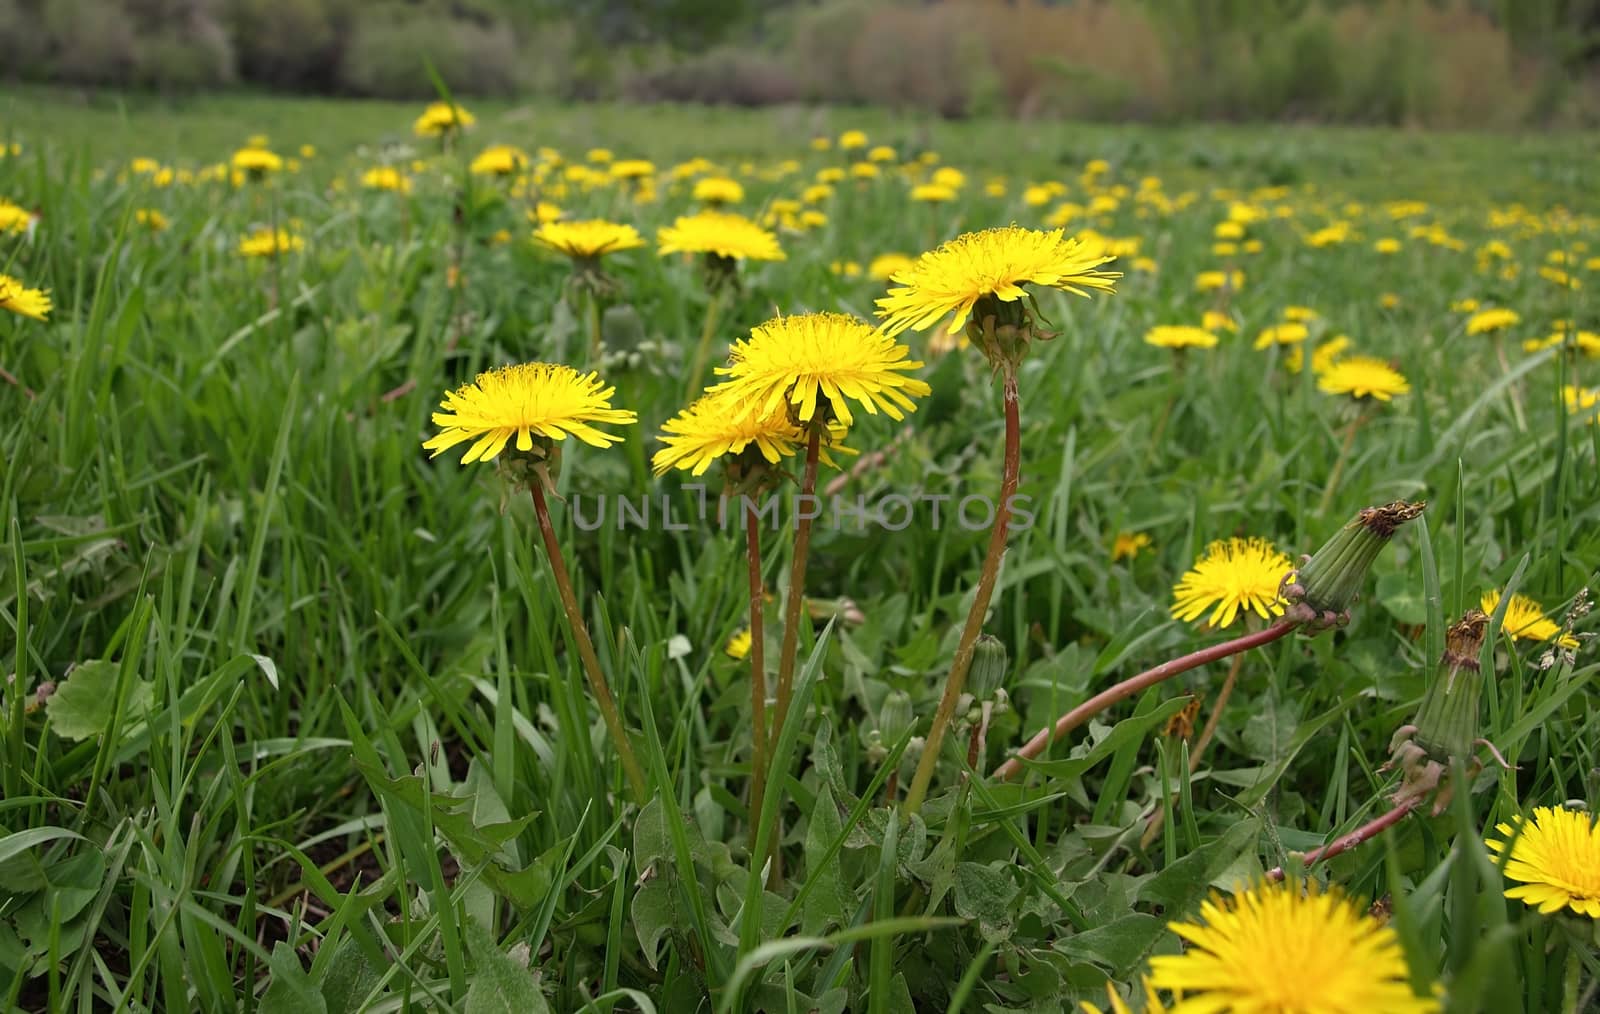 Field of yellow dandelions. This image has been converted from a RAW-format.